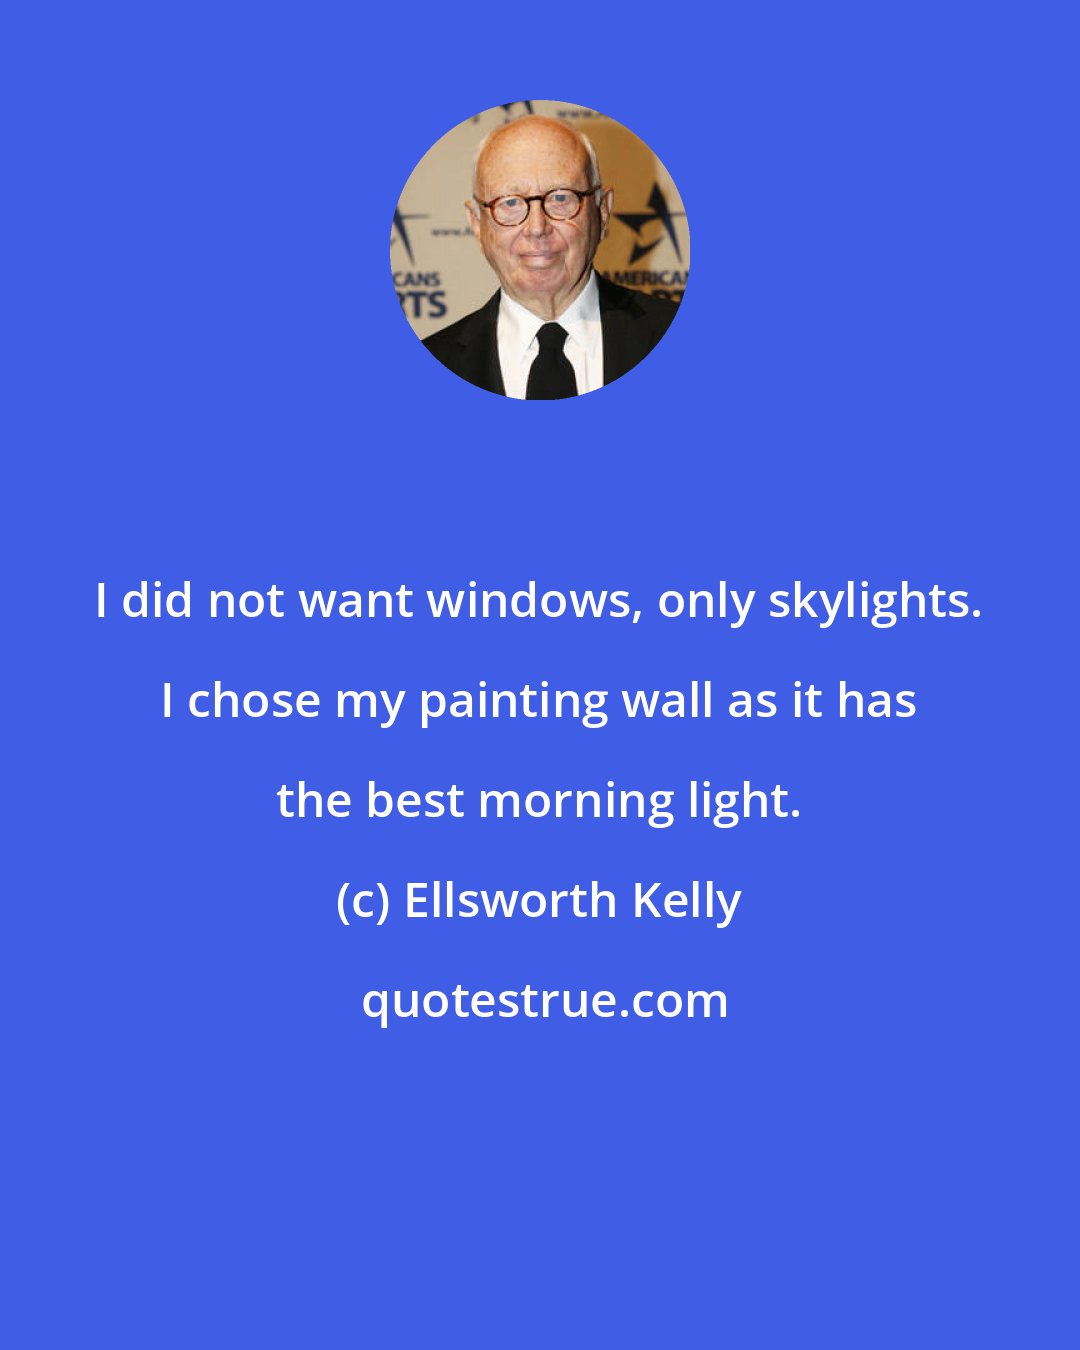 Ellsworth Kelly: I did not want windows, only skylights. I chose my painting wall as it has the best morning light.